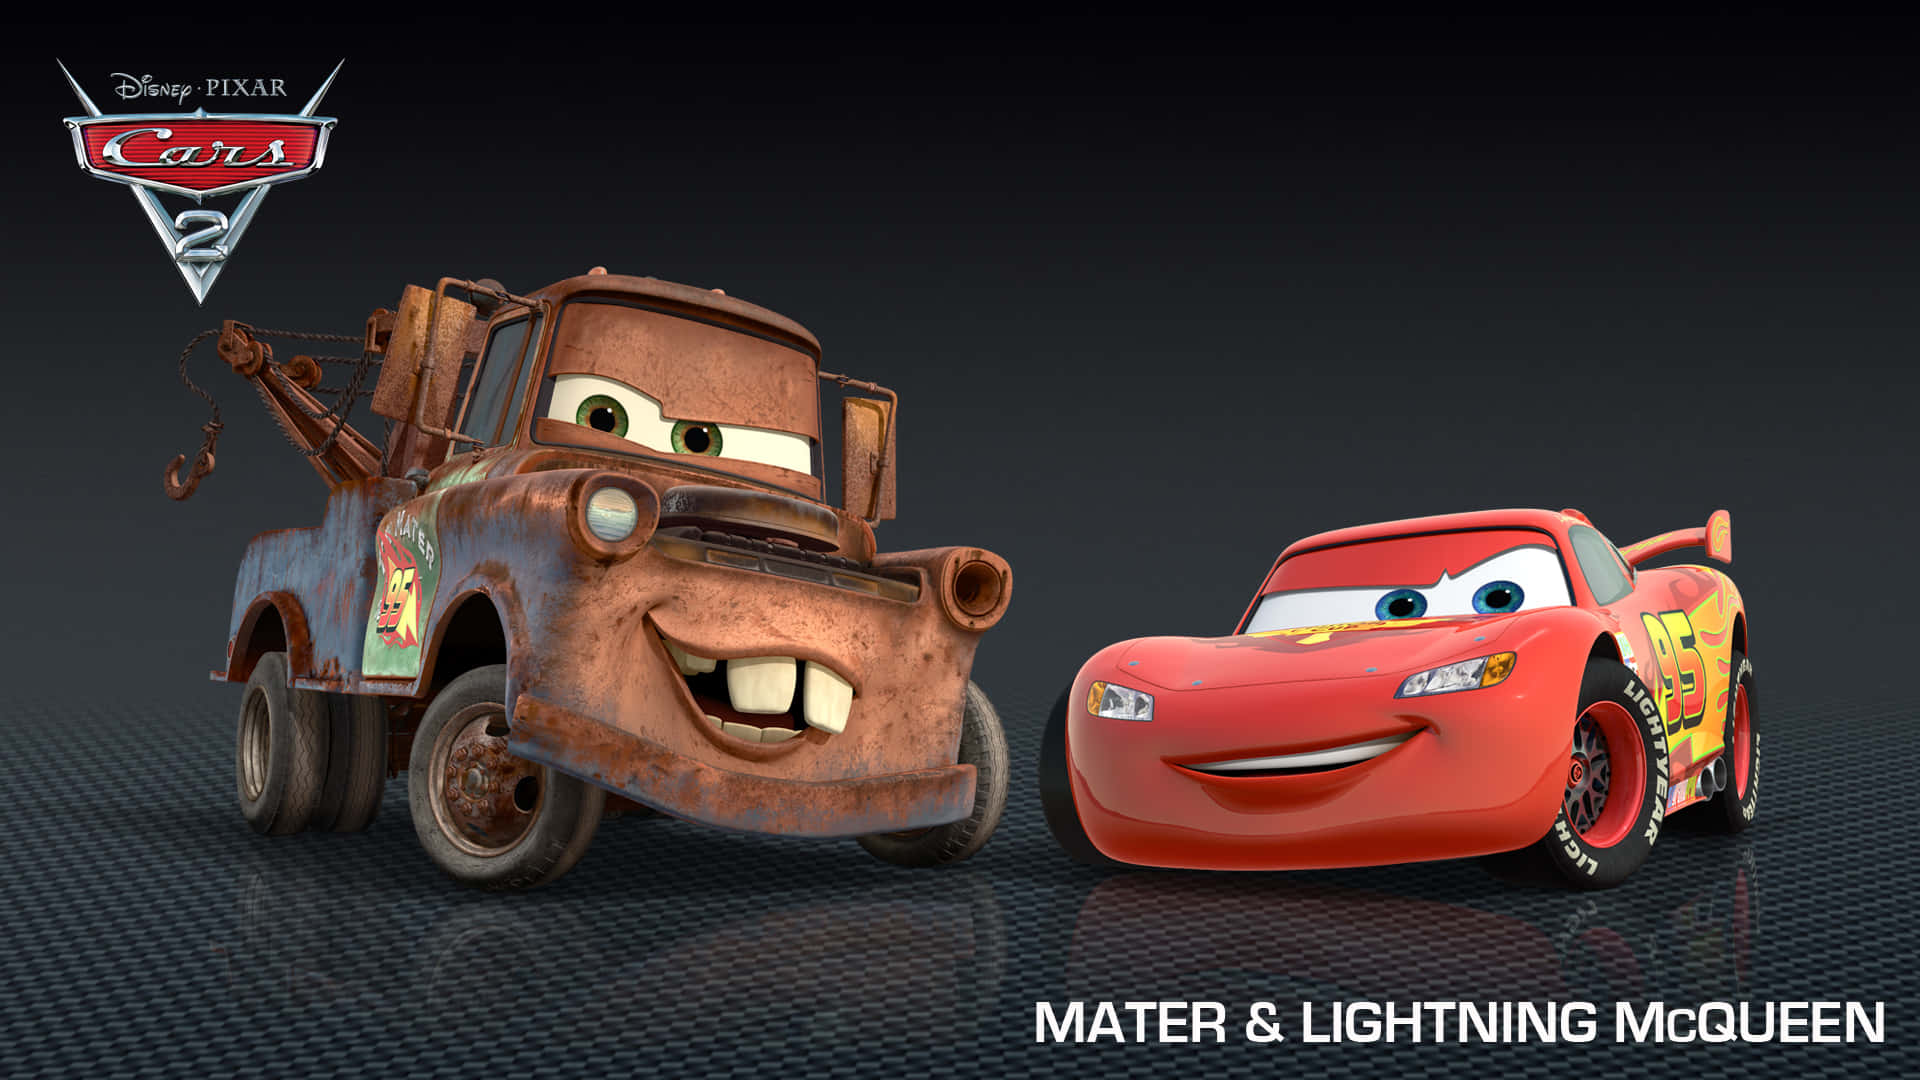 “Lightning McQueen and Mater in Cars 2”